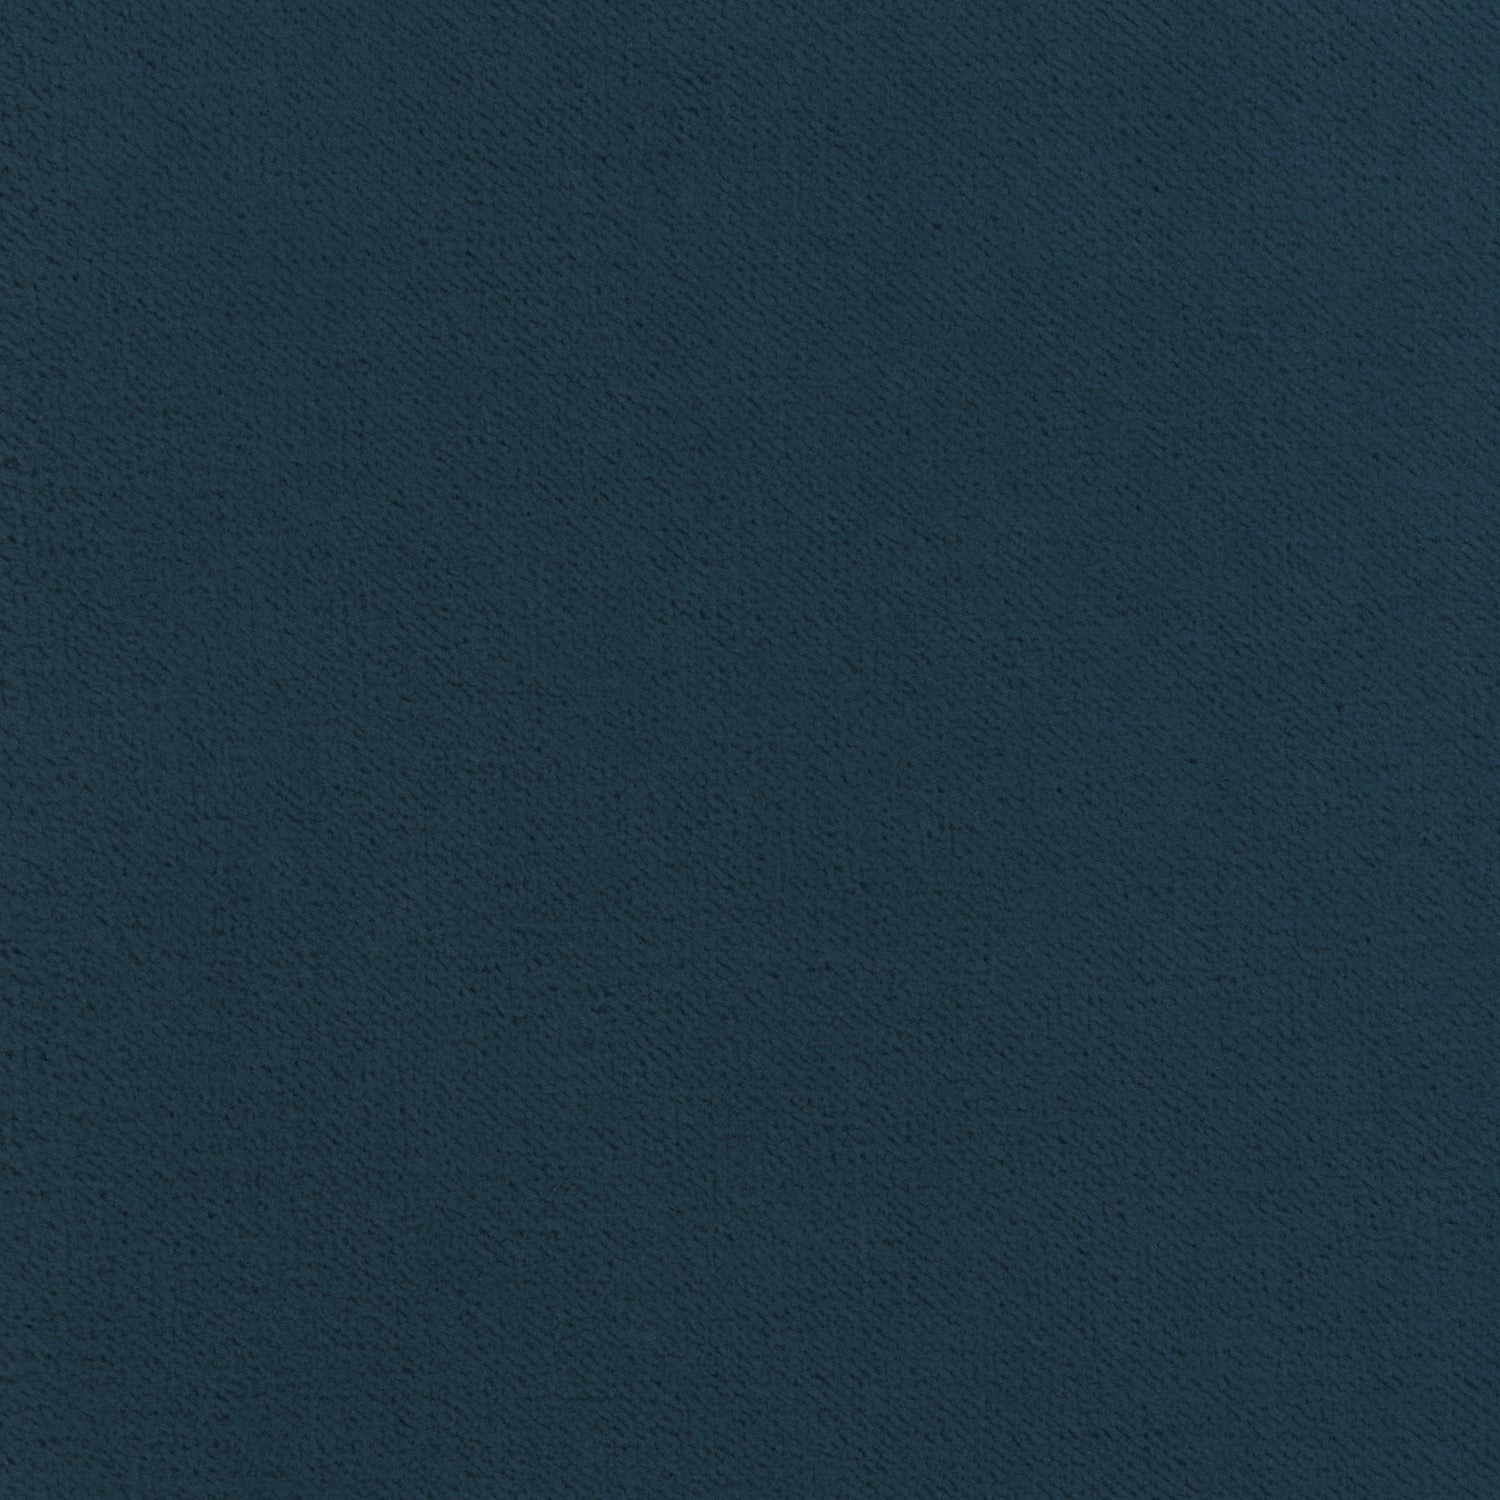 Club Velvet fabric in denim color - pattern number W7239 - by Thibaut in the Club Velvet collection